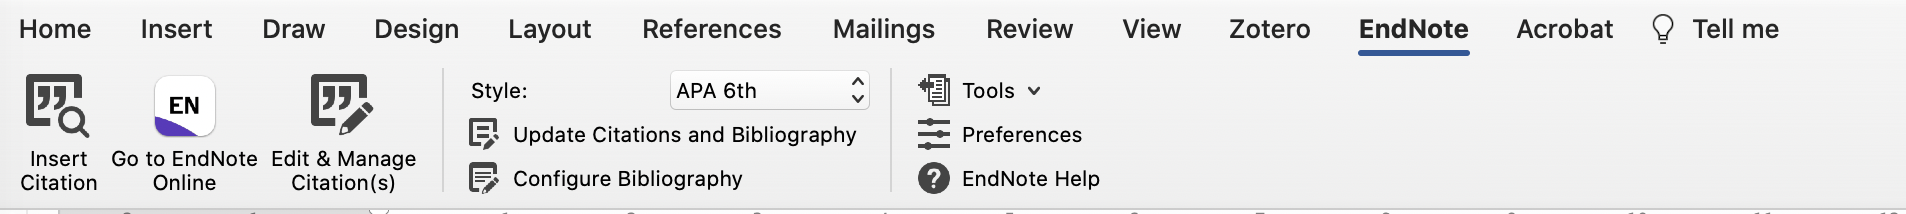 Endnote toolbar in word